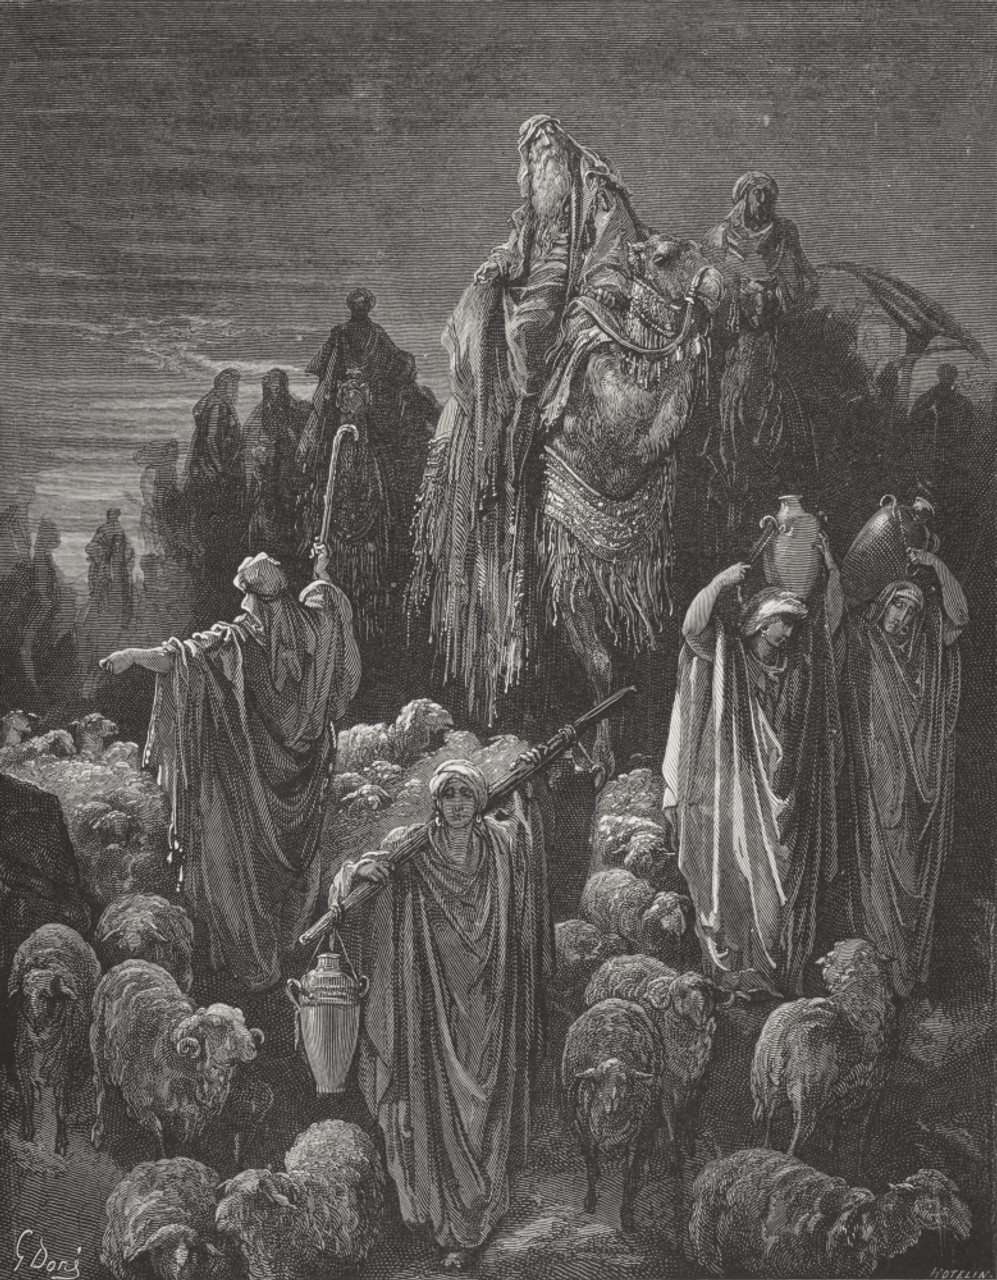 Engraving By Gustave Dore 1832-1883 French Artist And Illustrator